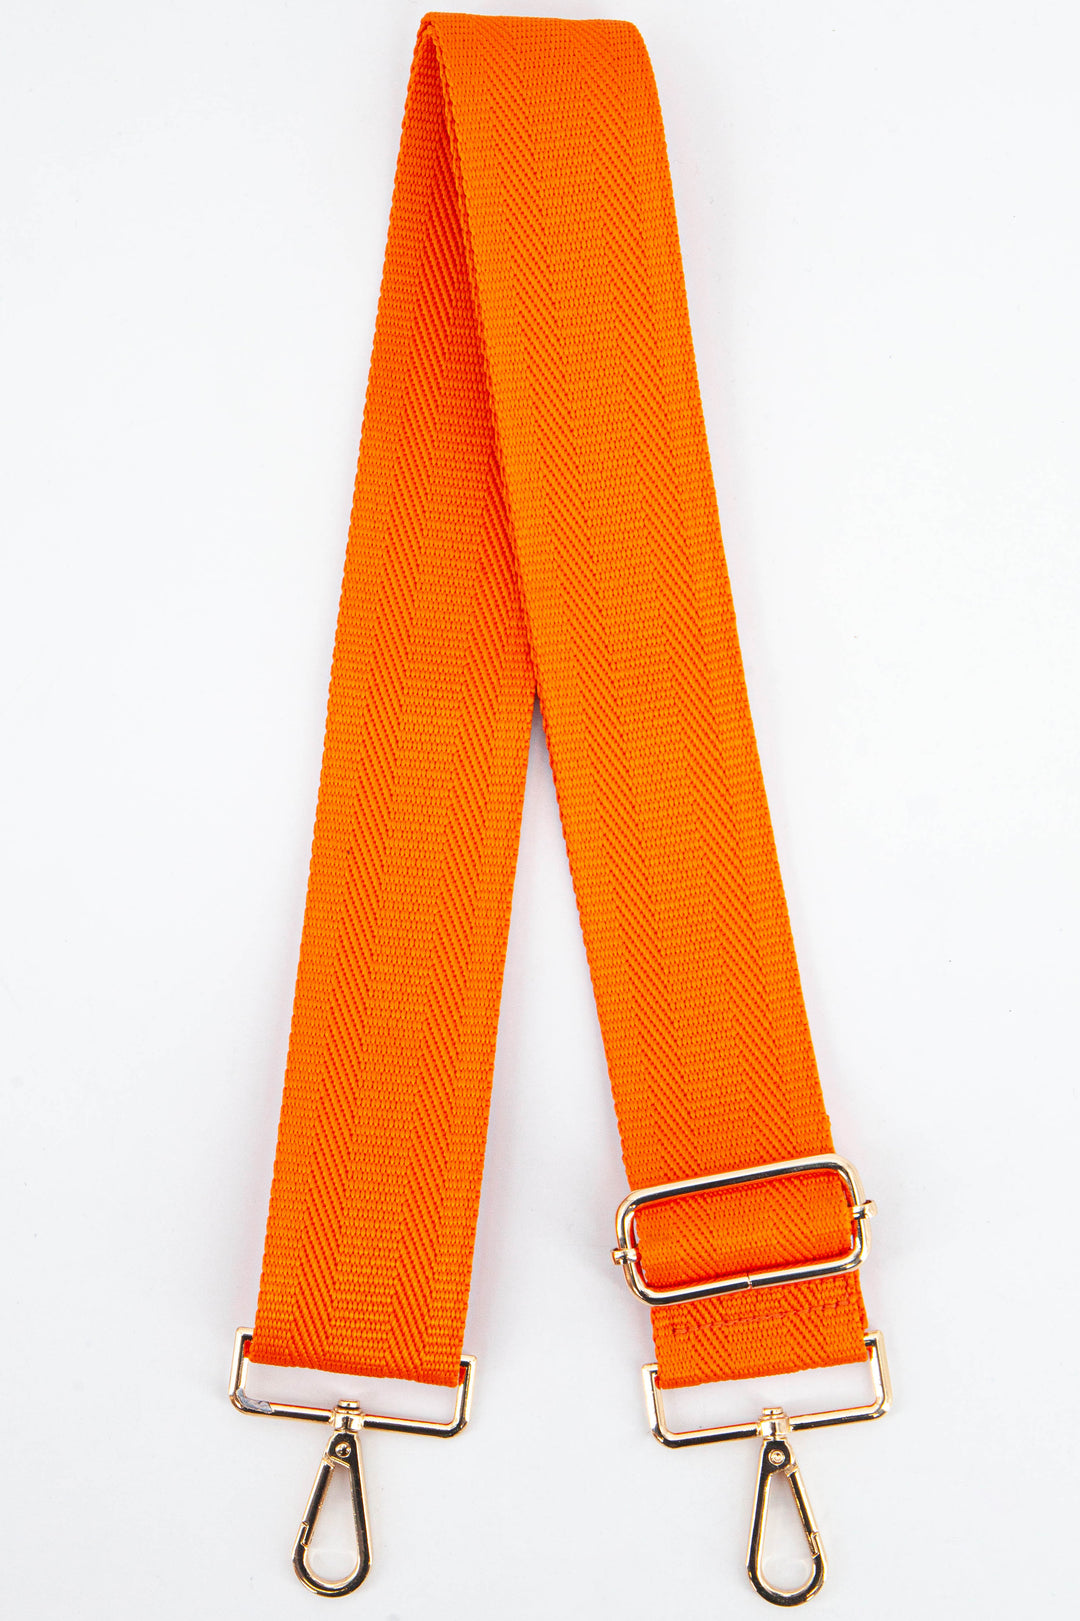 plain orange clip on bag strap in a textured orange woven material with gold hardware